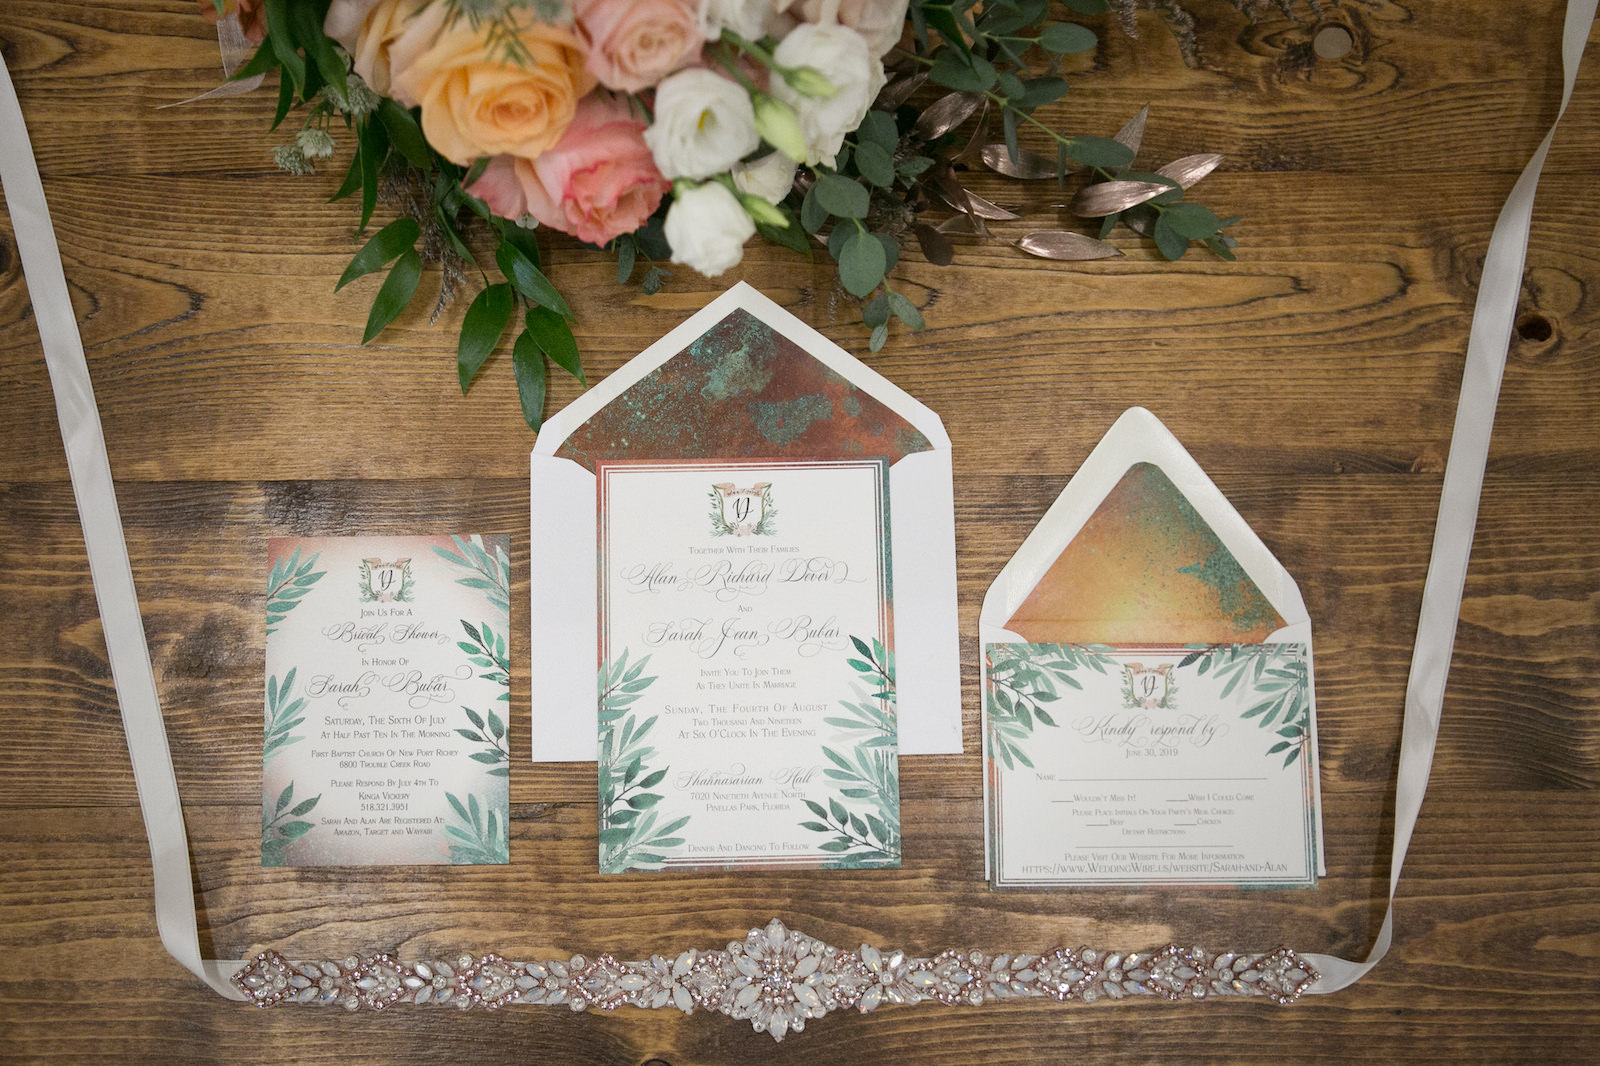 Watercolor Greenery Leaves, Copper and Patina with Gold Foil Envelope Wedding Invitation Suite, Rhinestone Bridal Belt | Wedding Photographer Carrie Wildes Photography